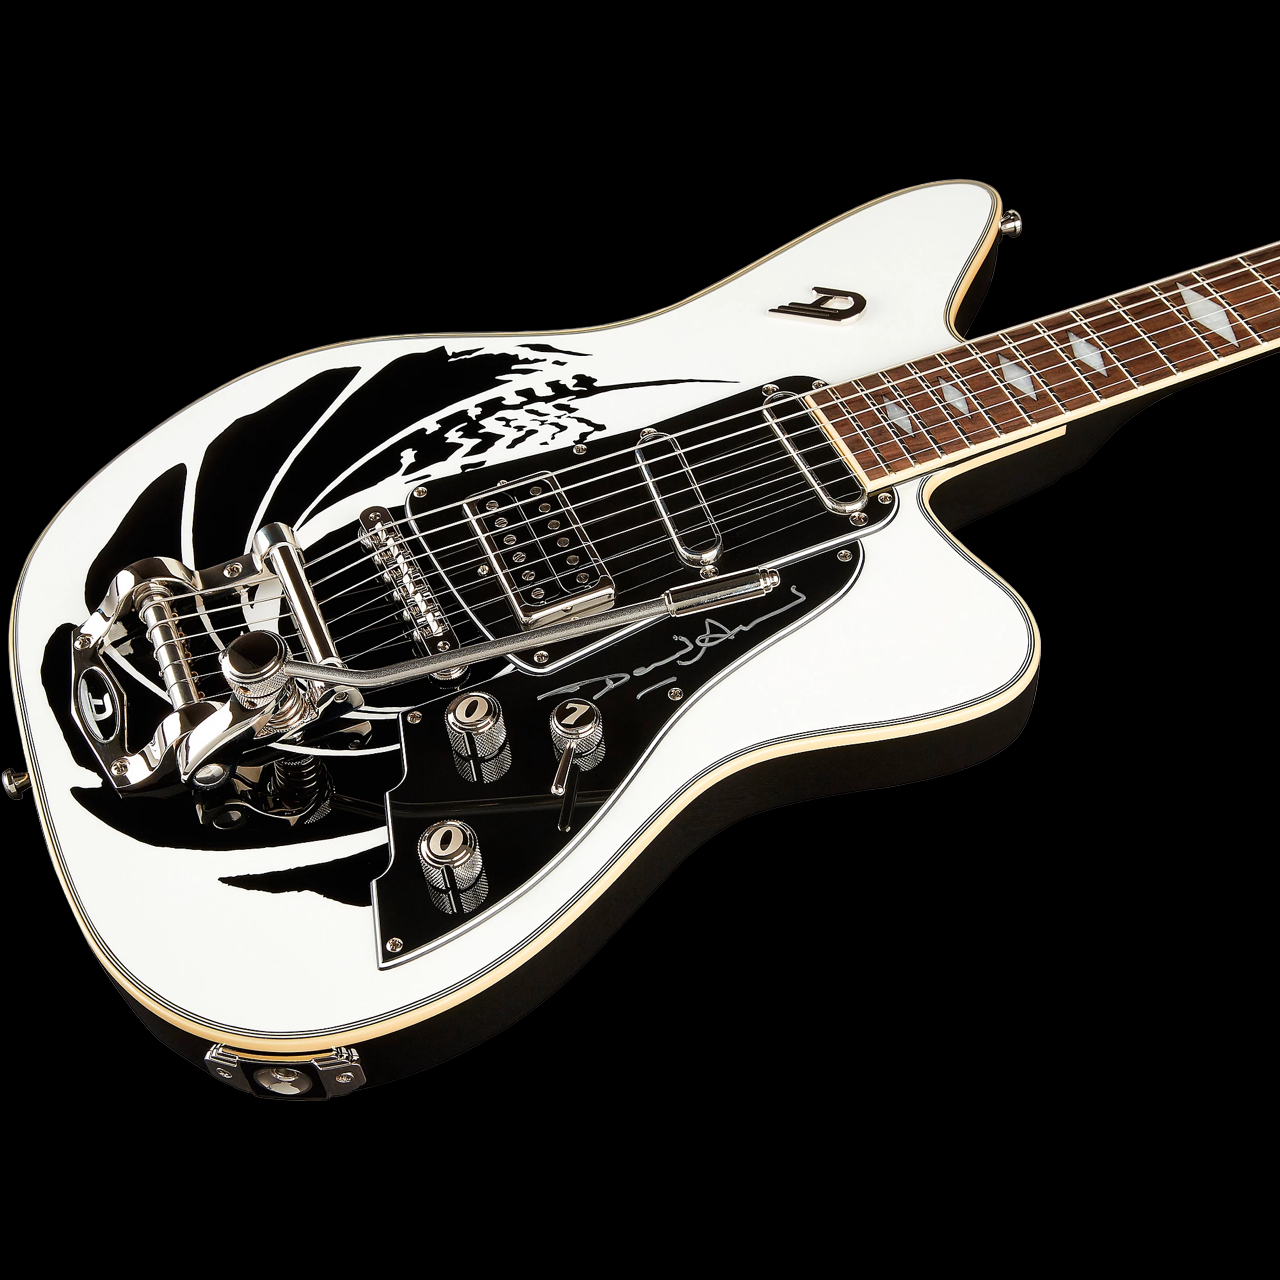 Showing off the side profile of the Duesenberg Alliance Series James Bond 007 Alliance Electric Guitar. On the three knobs, 1 volume 1 tone and 1 rotary swing, the 007 number is displayed